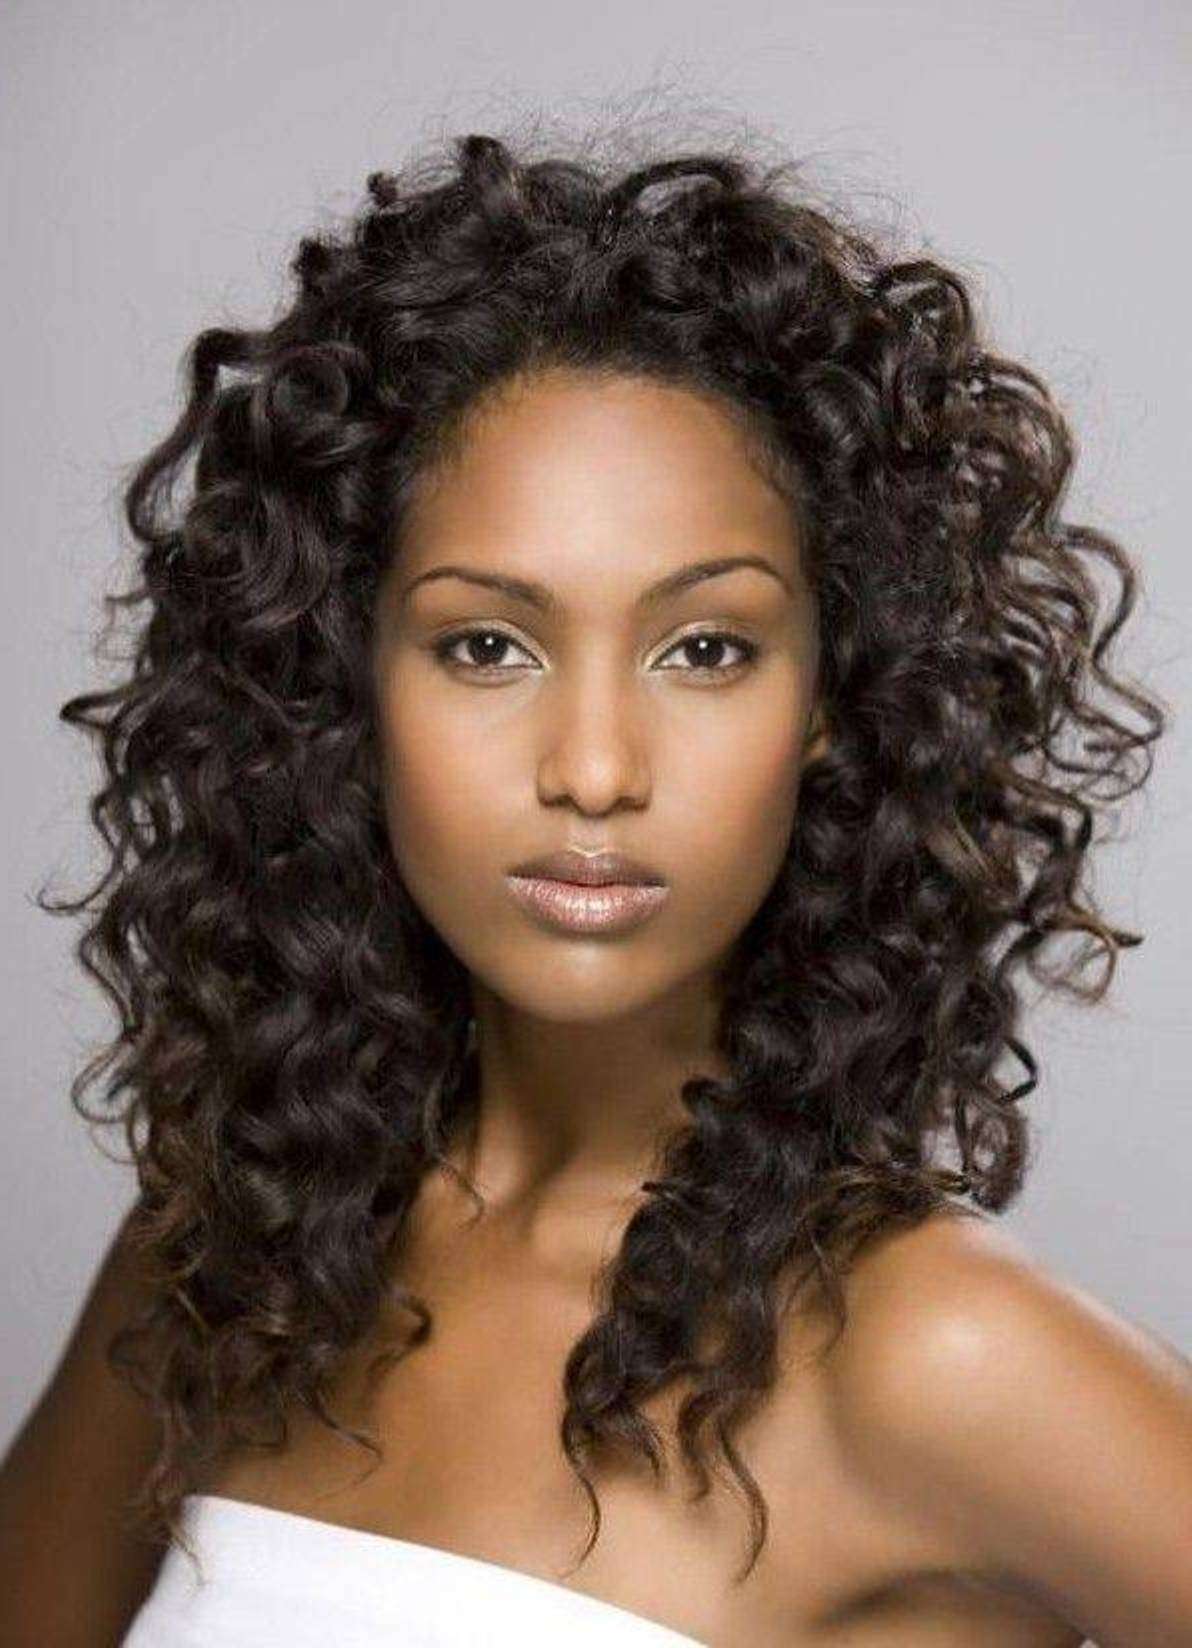 Haircuts For Black Hair
 50 Hairstyles Ideas for Black Women to Try This Year MagMent